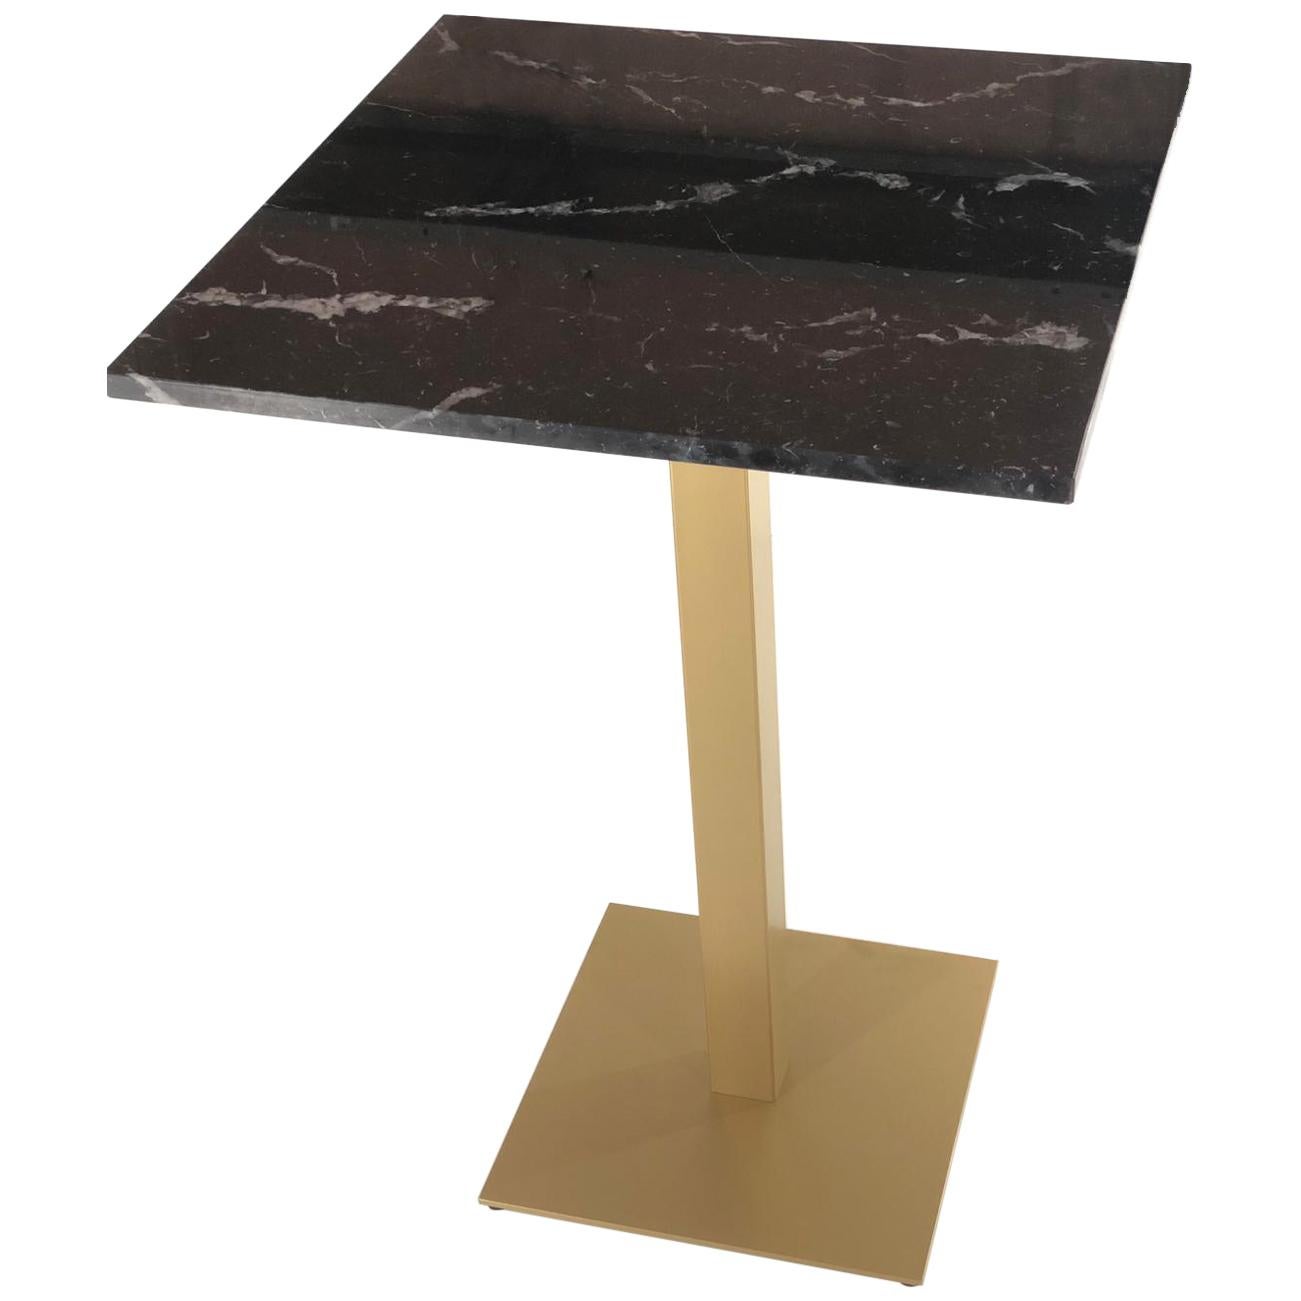 New Bistro High Table in Gilded Wrought Iron with Black Marble Top. Indoor & Out